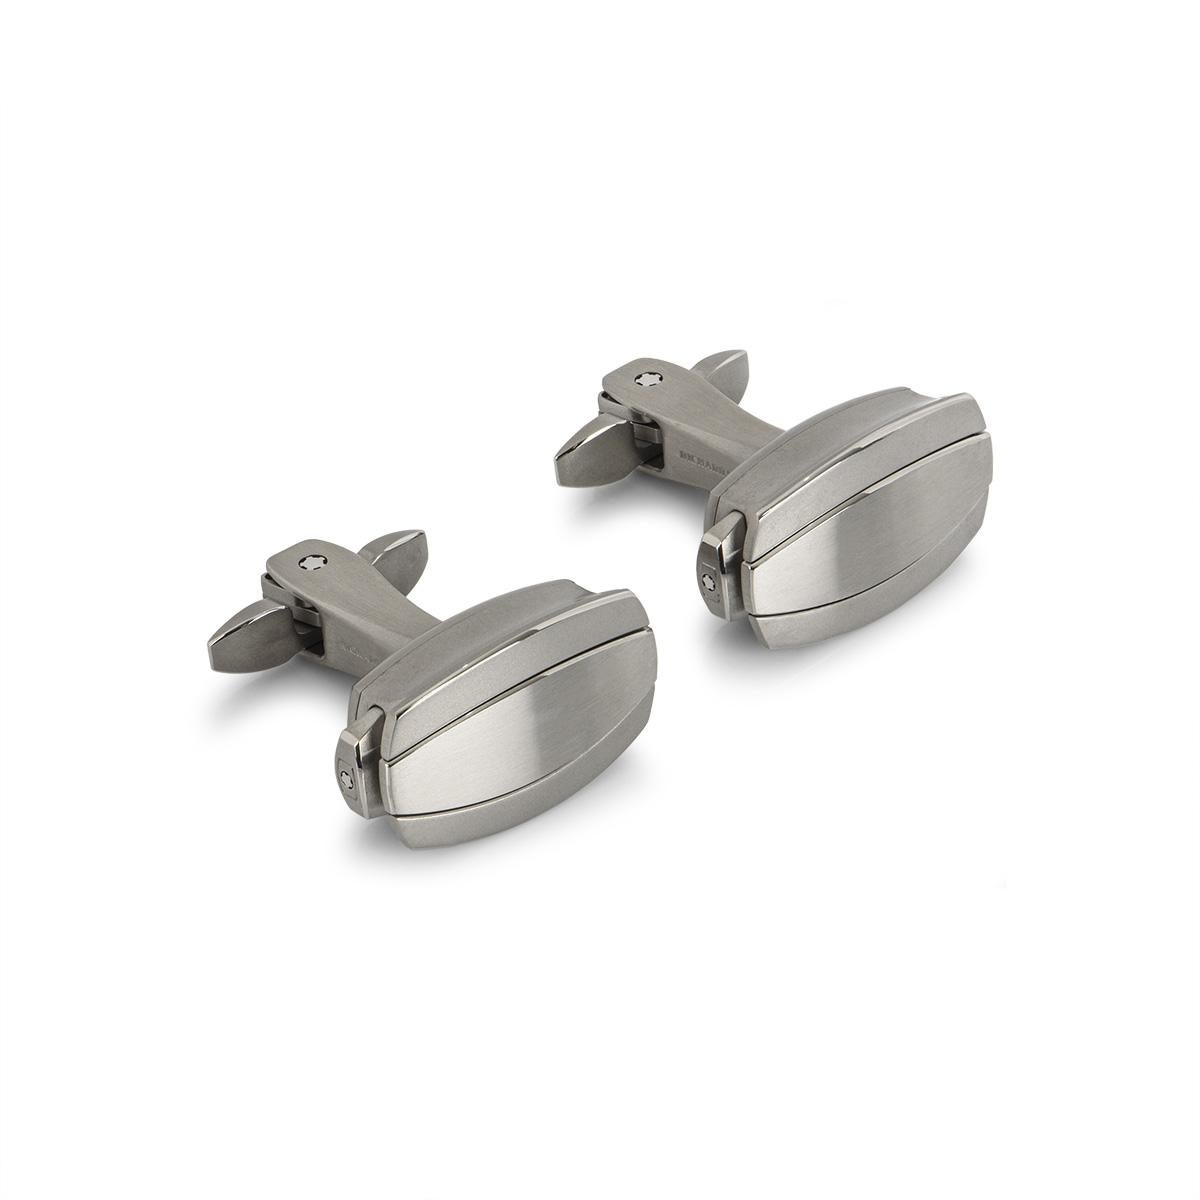 A pair of cufflinks by Richard Mille. Made from grade 5 titanium, the cufflinks have a satin-brushed finish, complemented by a hand bevelled edge. Featuring a patented mechanism that opens the bars using the push buttons on either side, once in